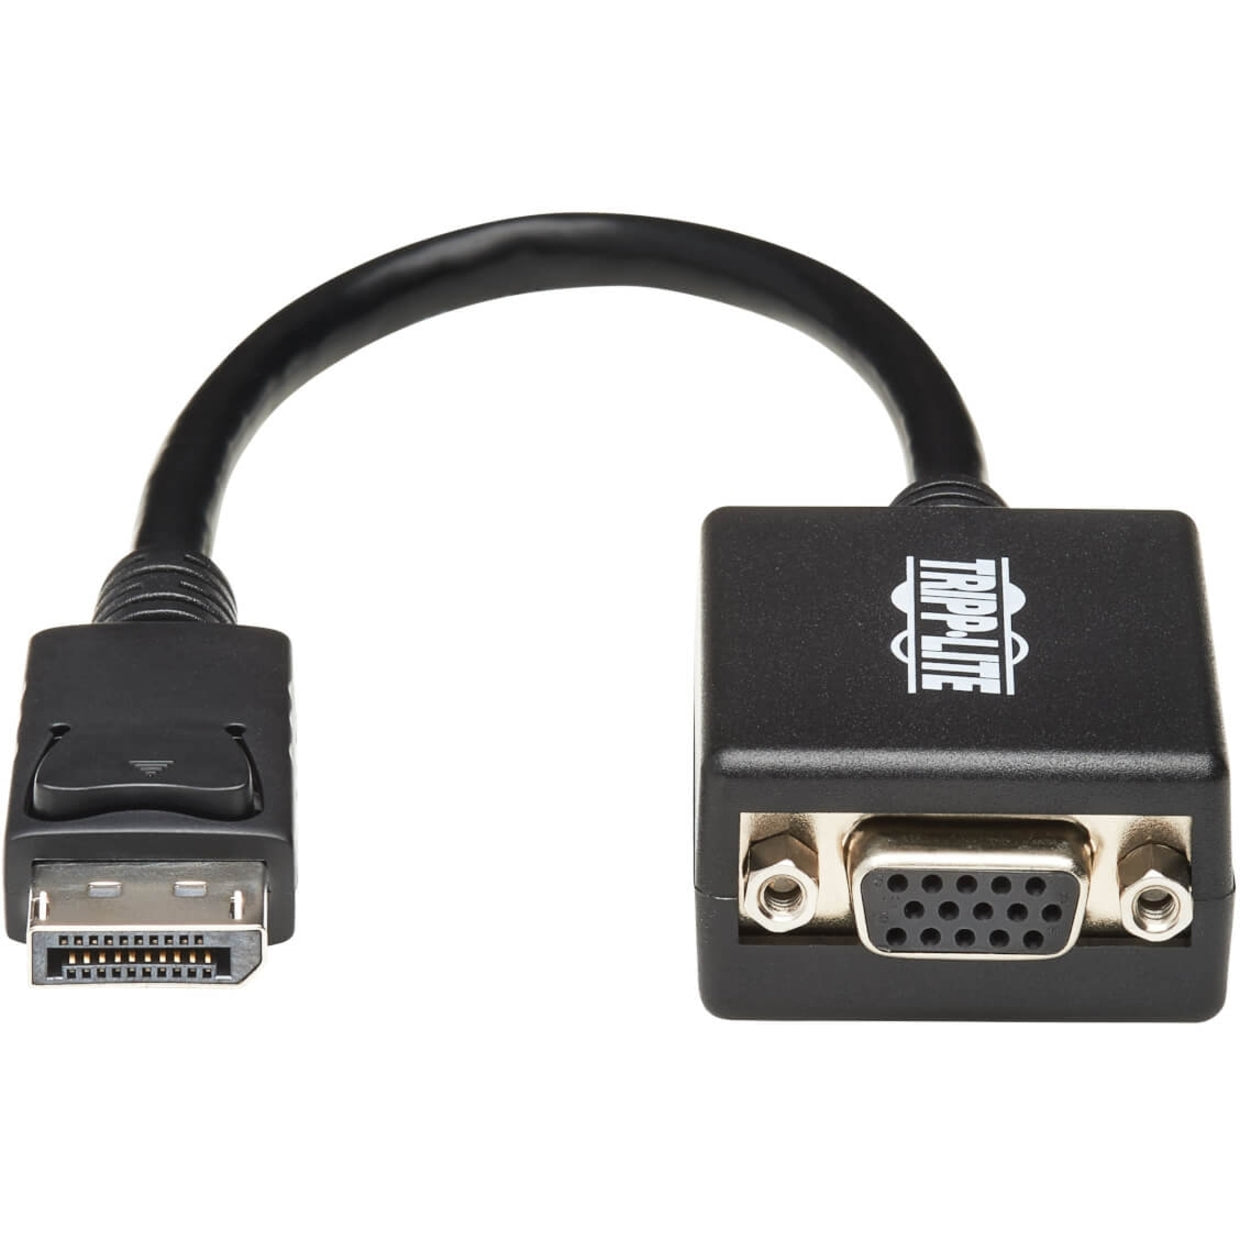 Tripp Lite P134-06N-VGA DisplayPort to VGA Active Cable Adapter, Plug & Play, 1920 x 1200 Supported Resolution